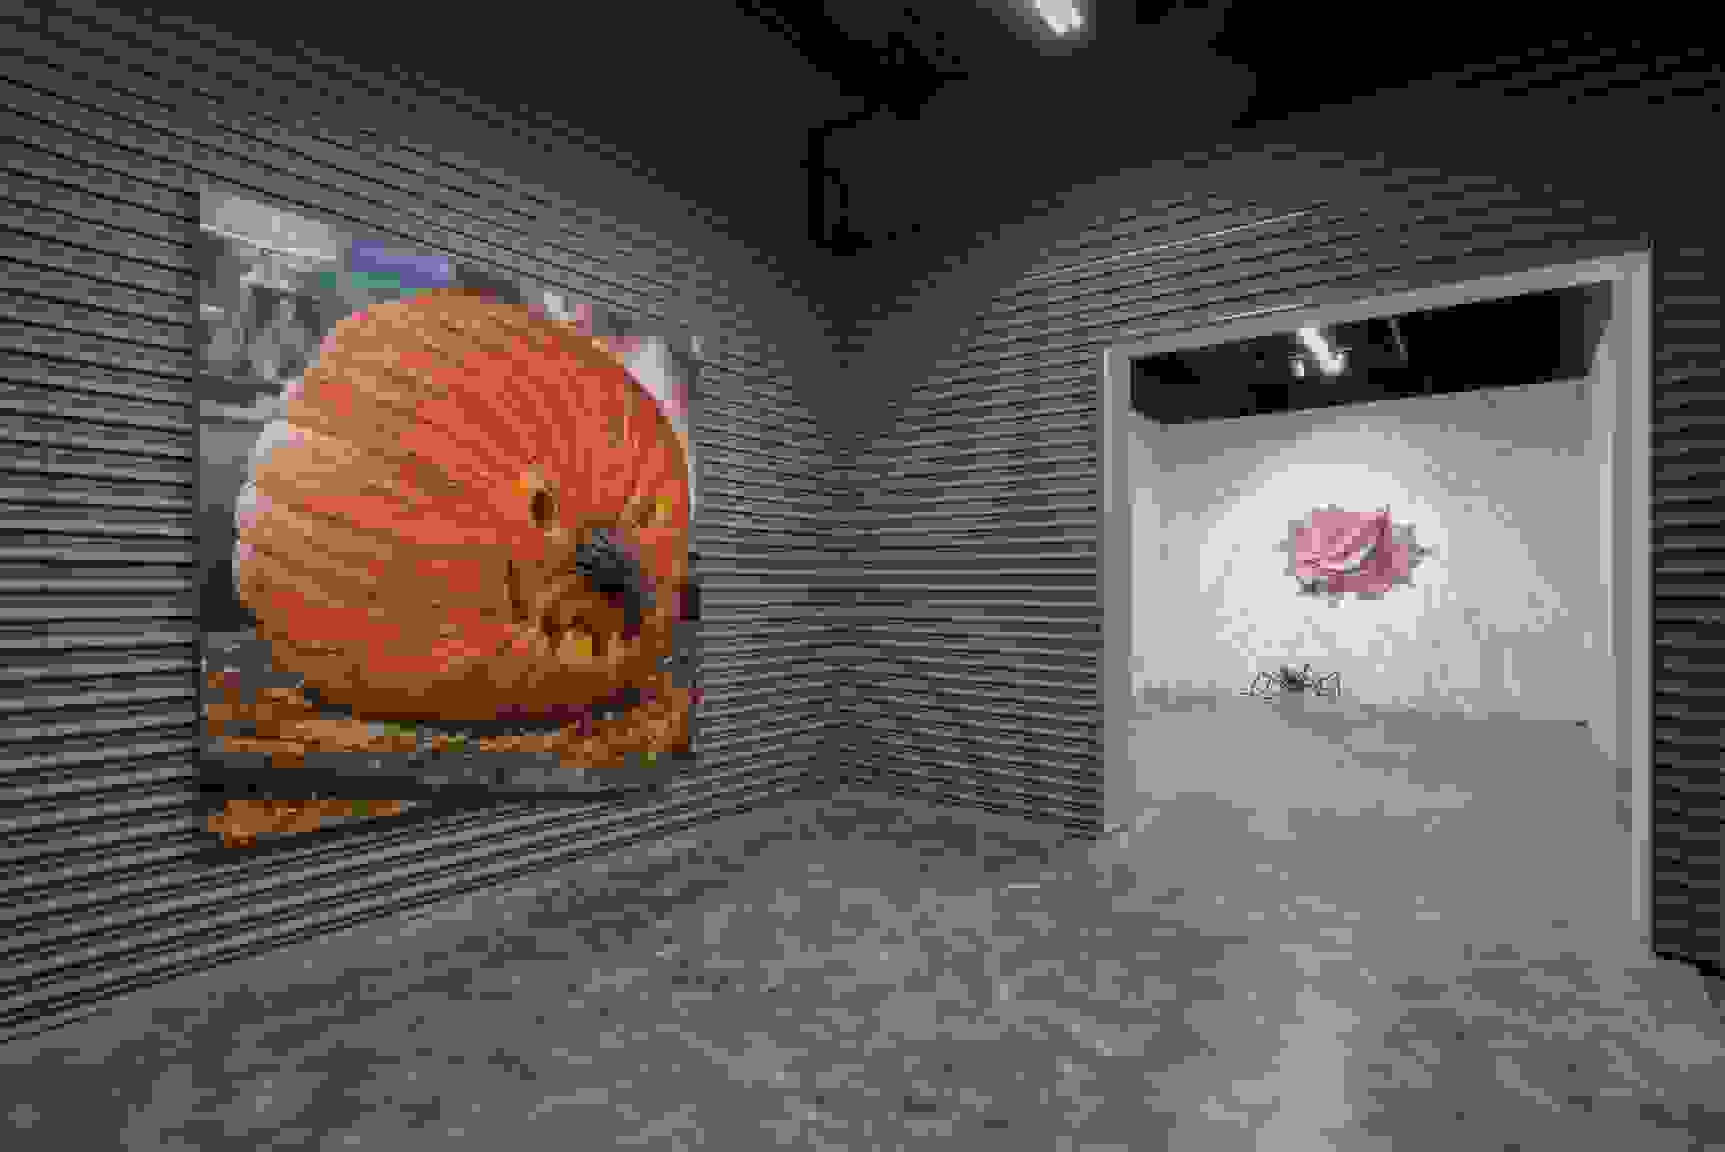 A grey room with a painting of a carved pumpkin on the wall, and another room in the distance with a painting of a woman's mouth pointing down towards a halloween decoration spider, surrounded by webs.